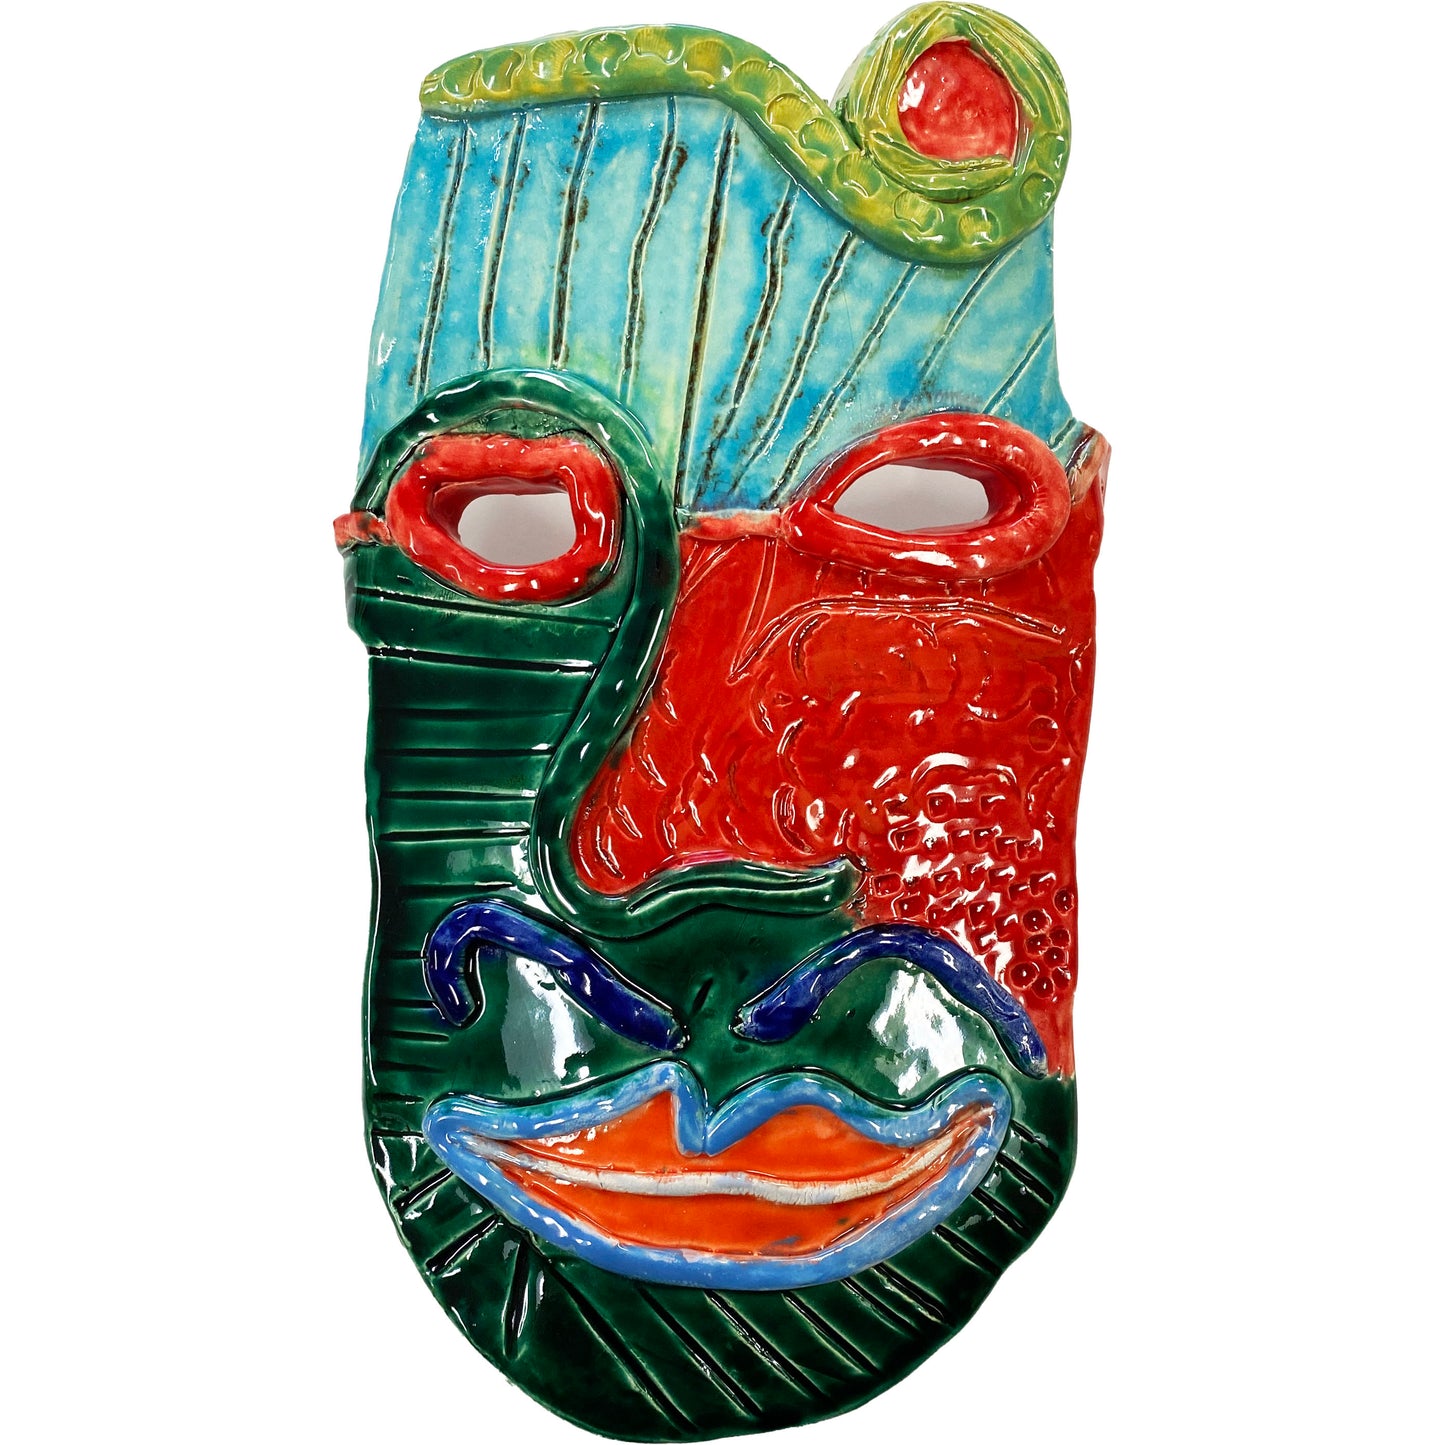 Ceramic Arts Handmade Clay Crafts Glazed 12-inch x 6.5-inch Abstract Mask made by Monty Chu